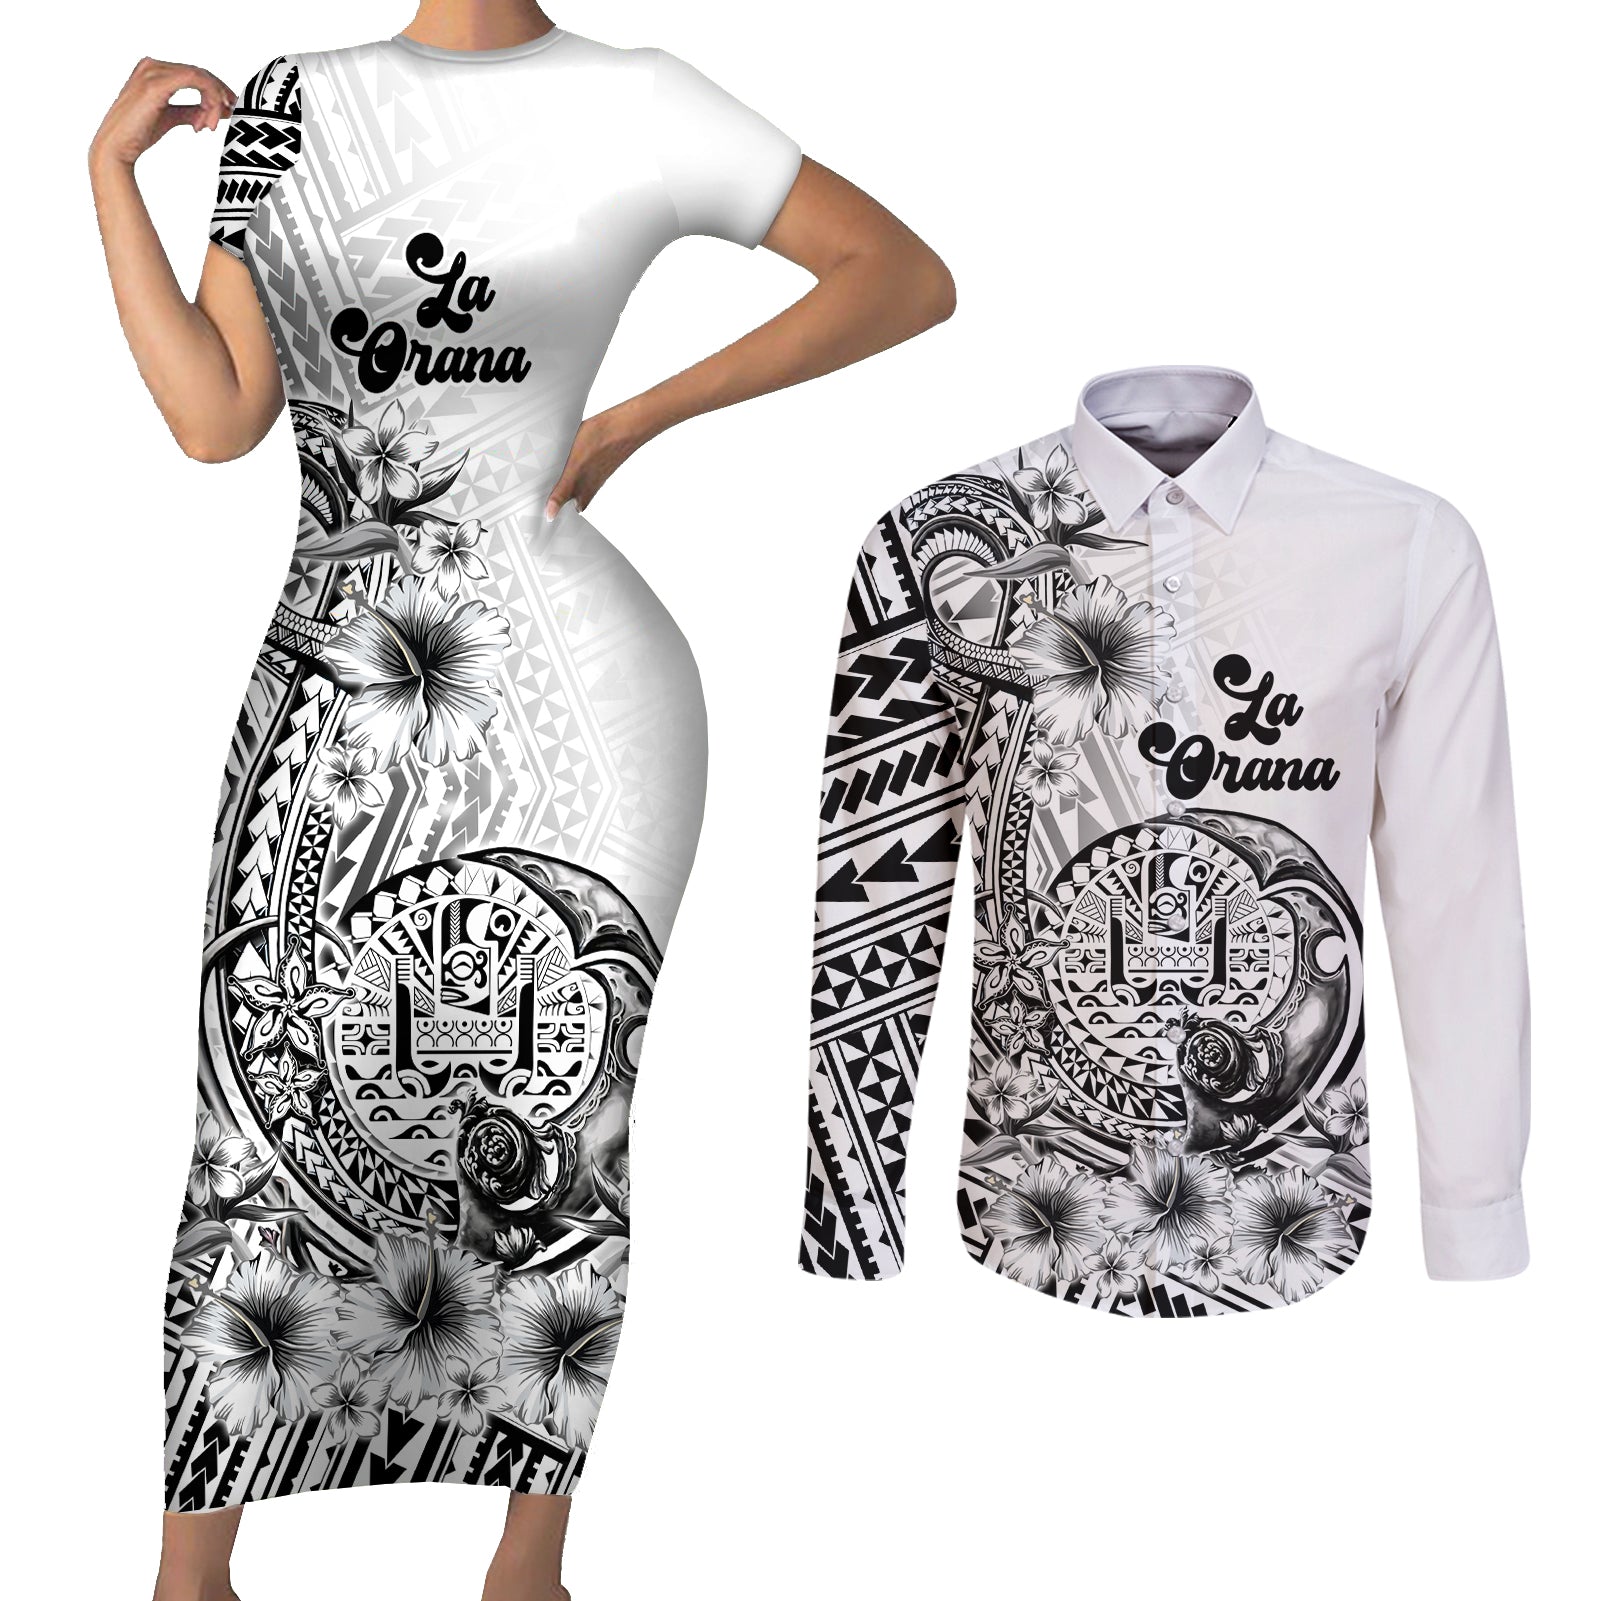 La Orana Tahiti Personalised Couples Matching Short Sleeve Bodycon Dress and Long Sleeve Button Shirt French Polynesia Hook Tattoo Special White Color LT9 White - Polynesian Pride